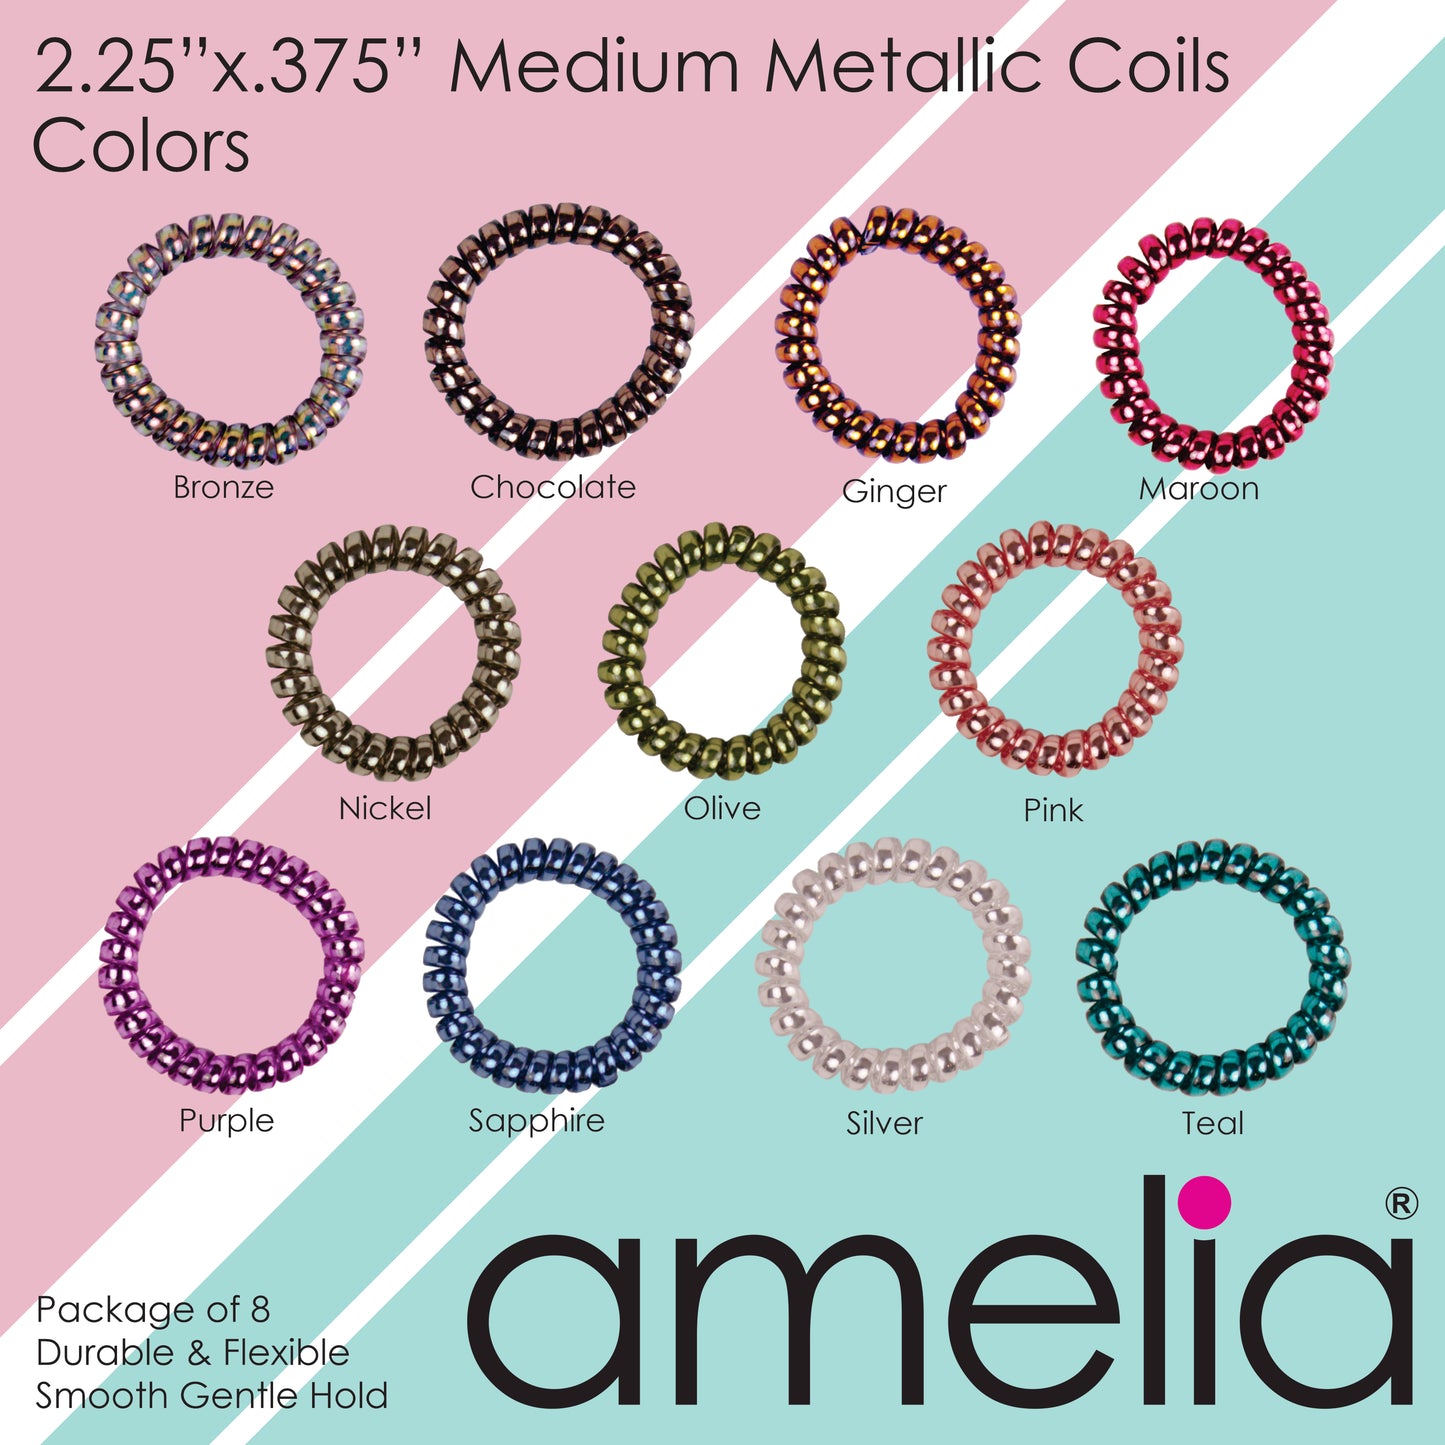 Amelia Beauty Products 8 Medium Smooth Elastic Hair Coils, 2.25in Diameter Spiral Hair Ties, Gentle on Hair, Strong Hold and Minimizes Dents and Creases, Sapphire Blue